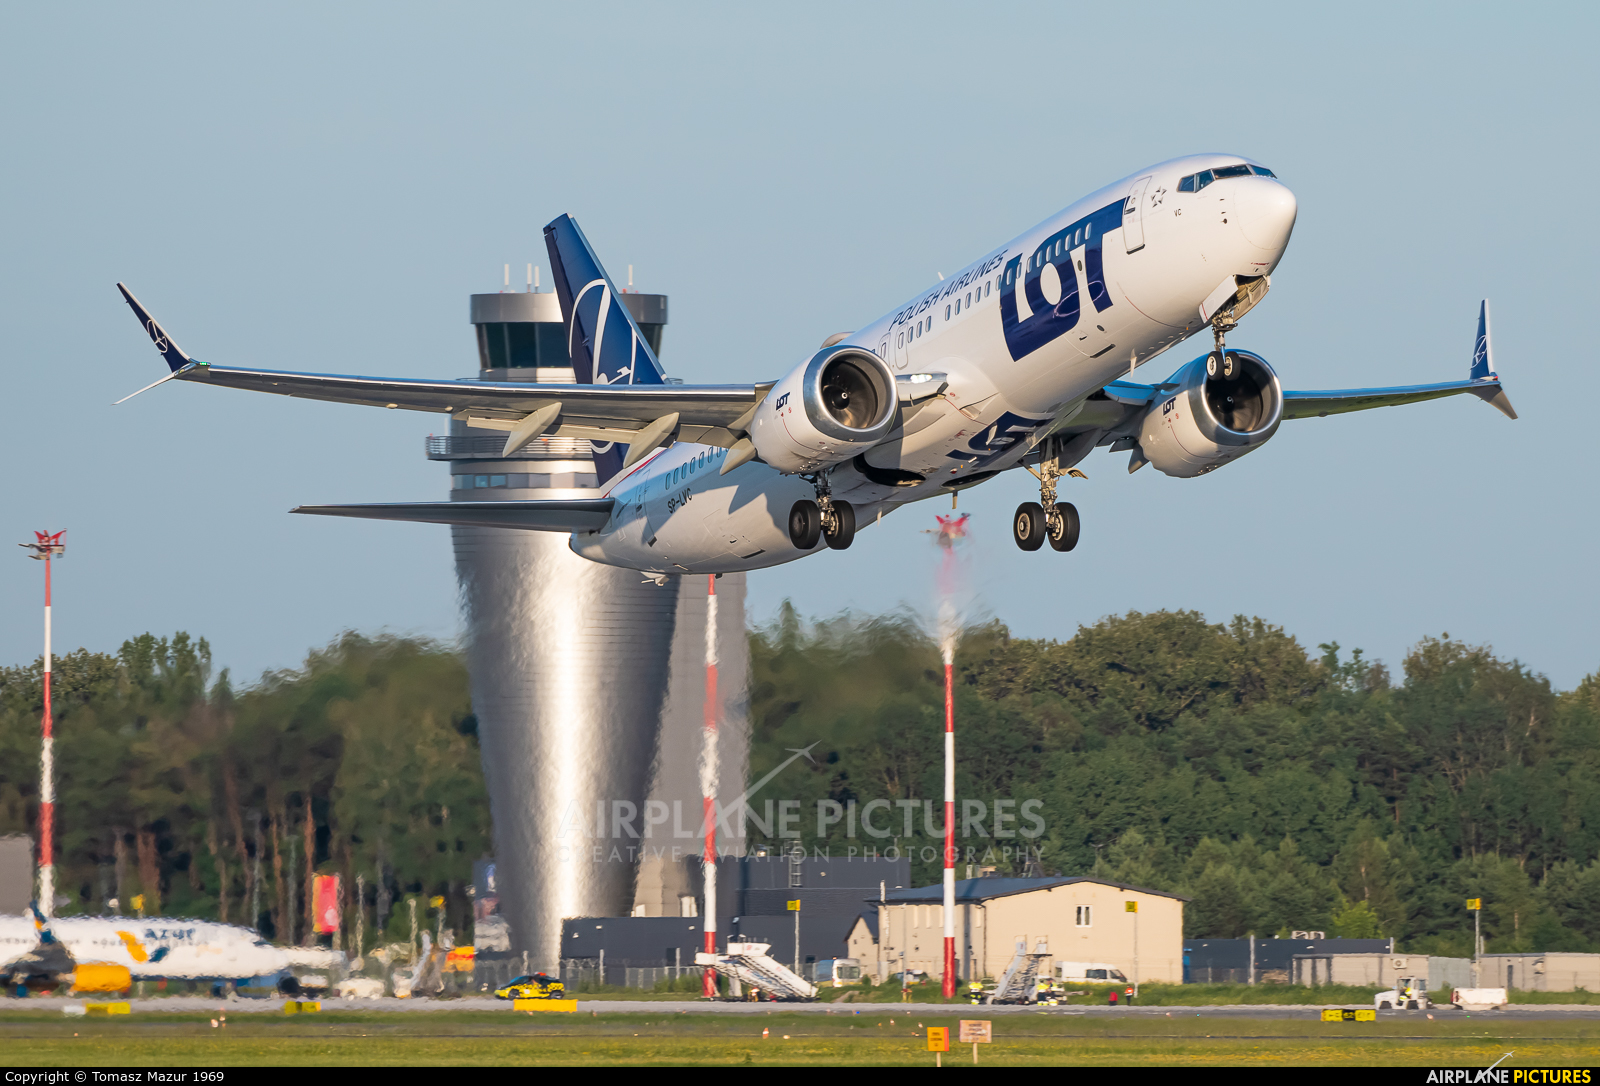 LOT - Polish Airlines SP-LVC aircraft at Katowice - Pyrzowice